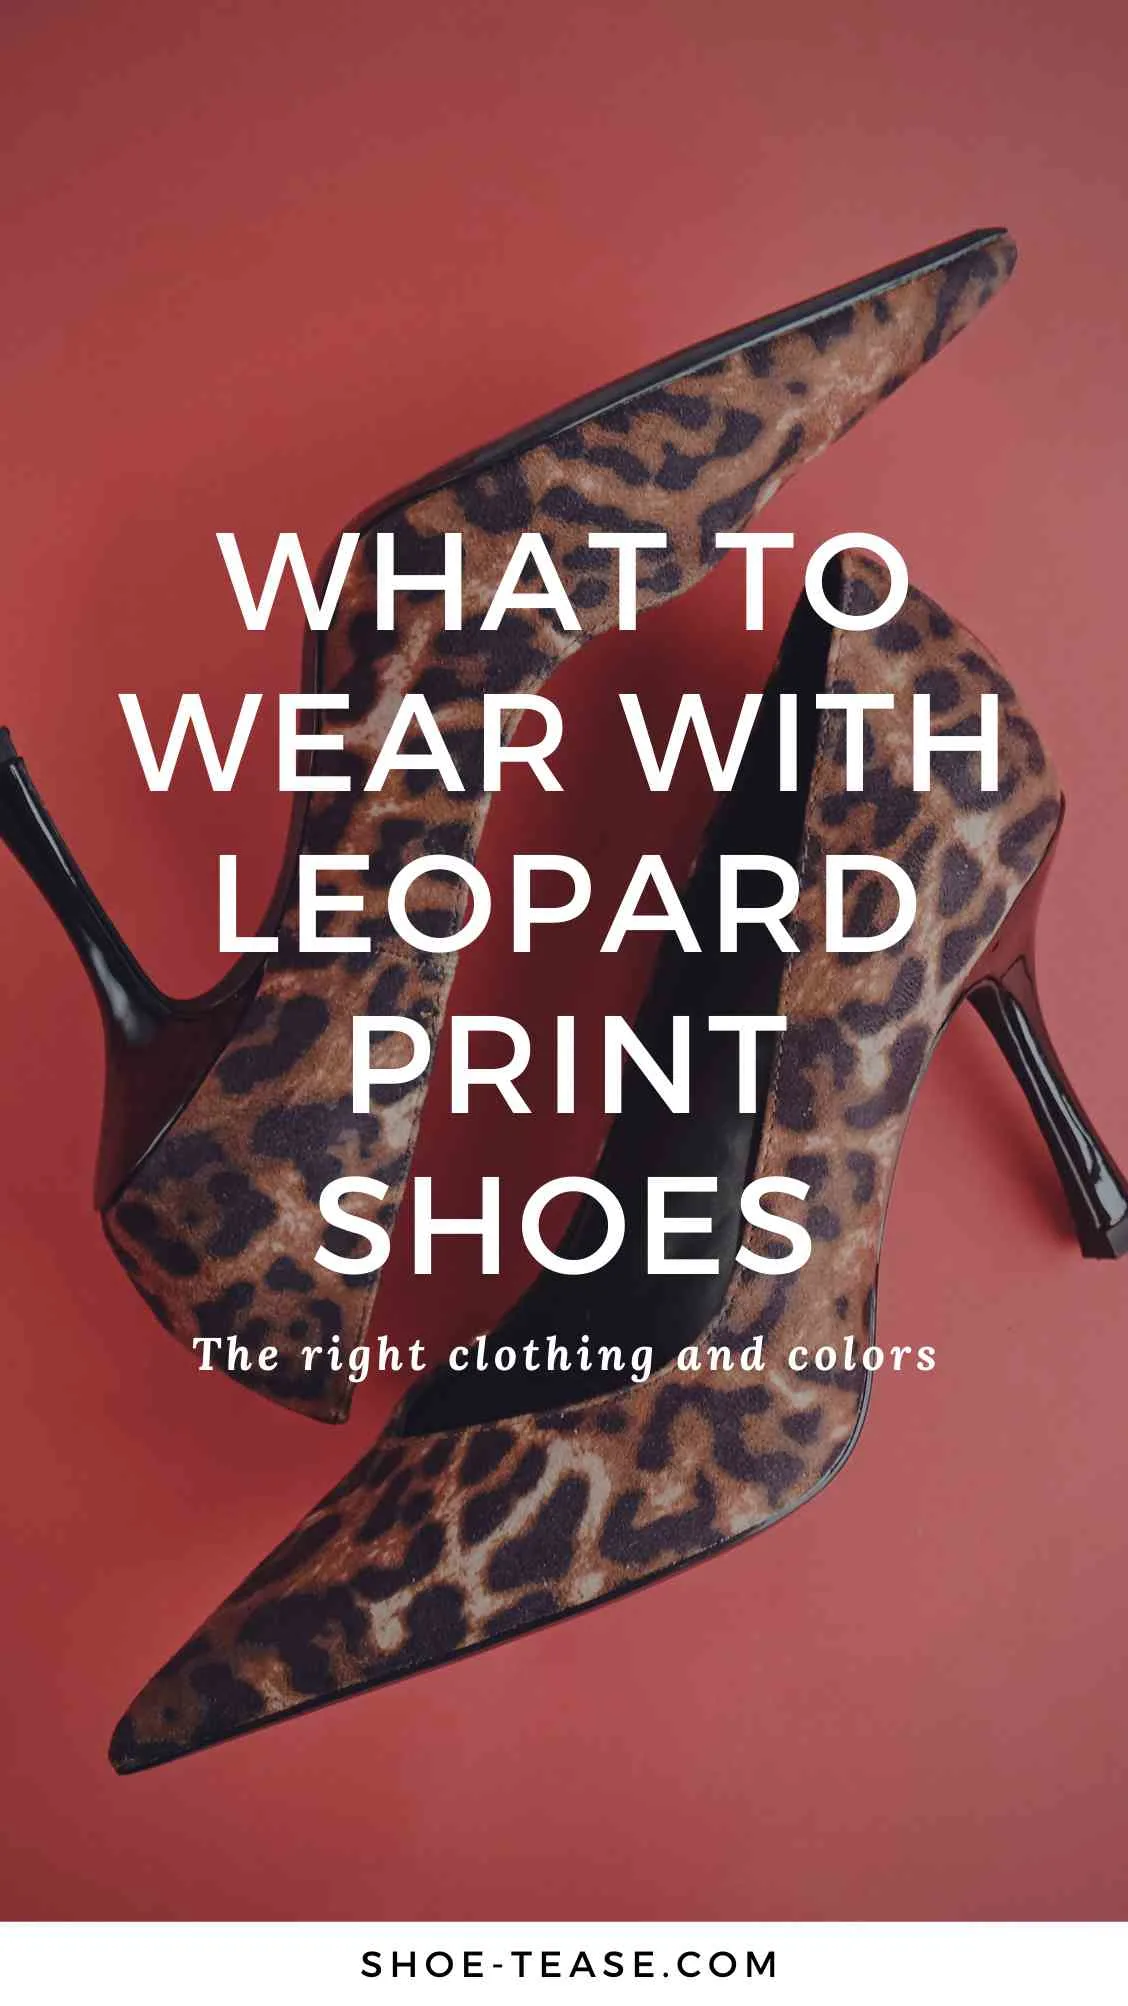 What to wear with leopard print shoes Pin ShoeTease.jpg